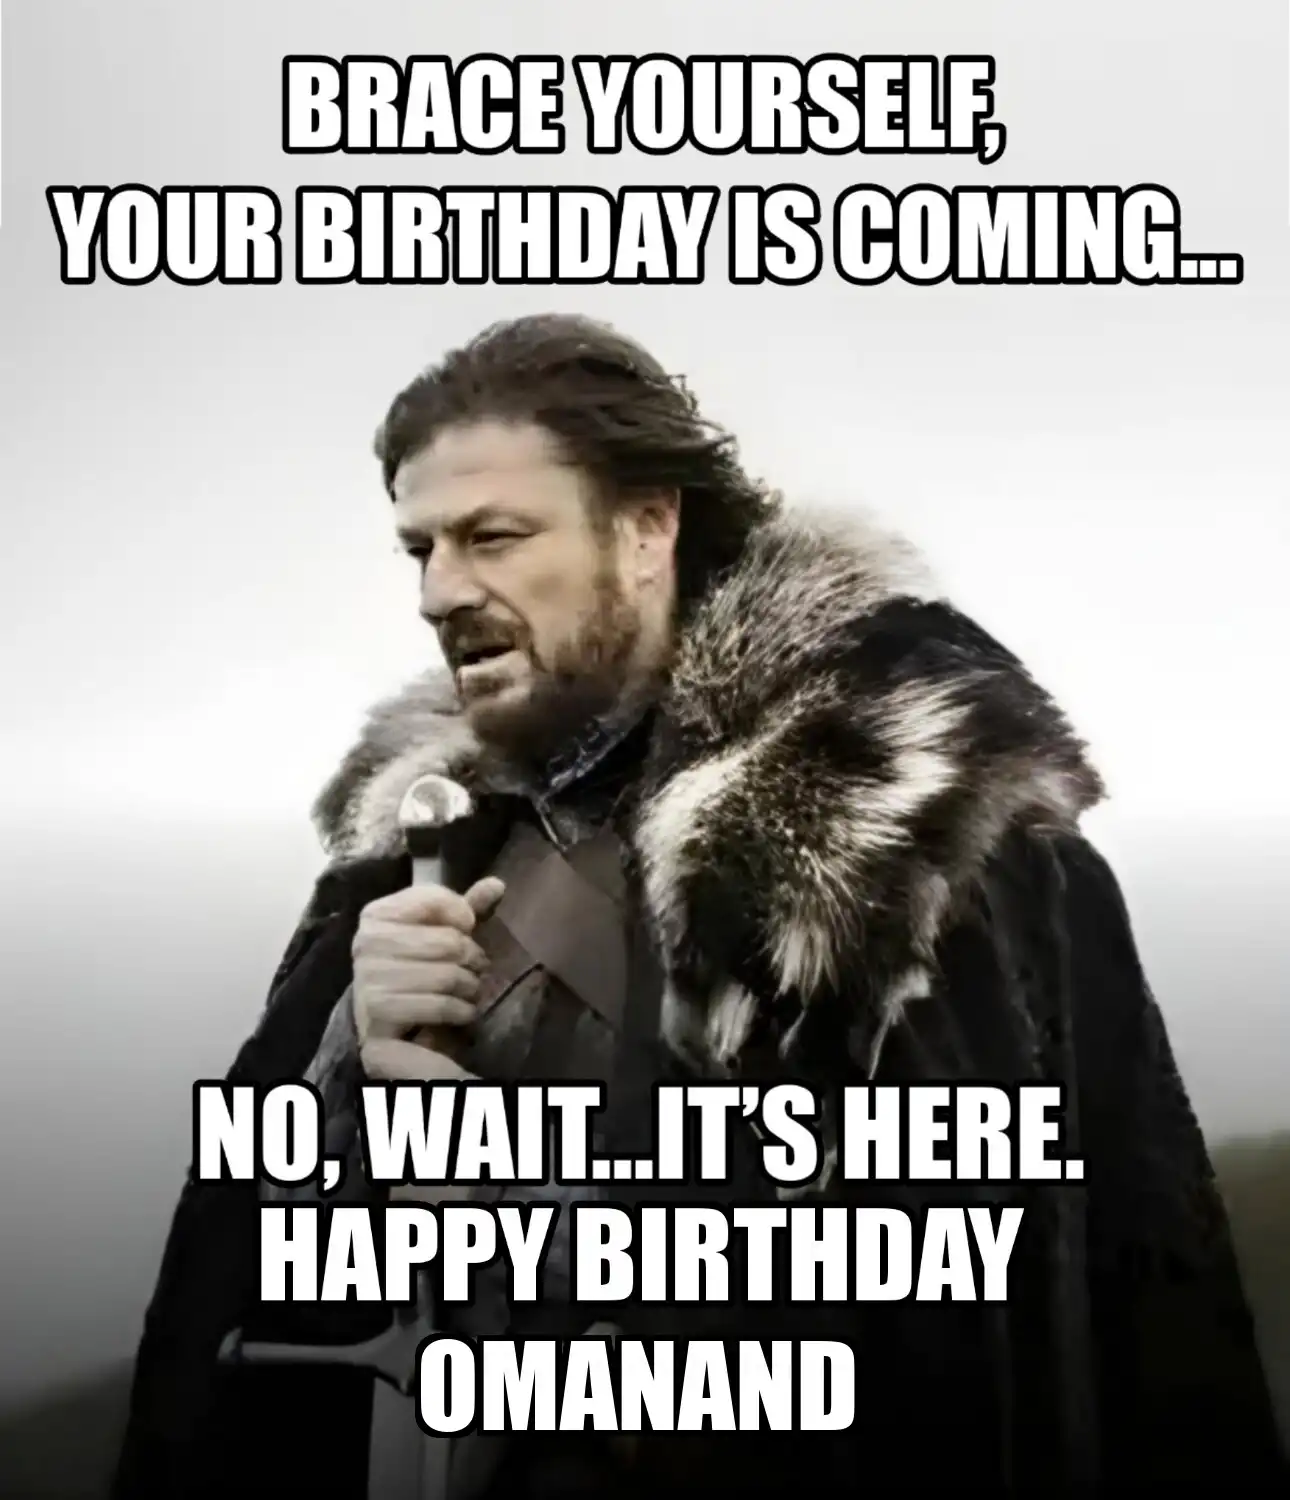 Happy Birthday Omanand Brace Yourself Your Birthday Is Coming Meme